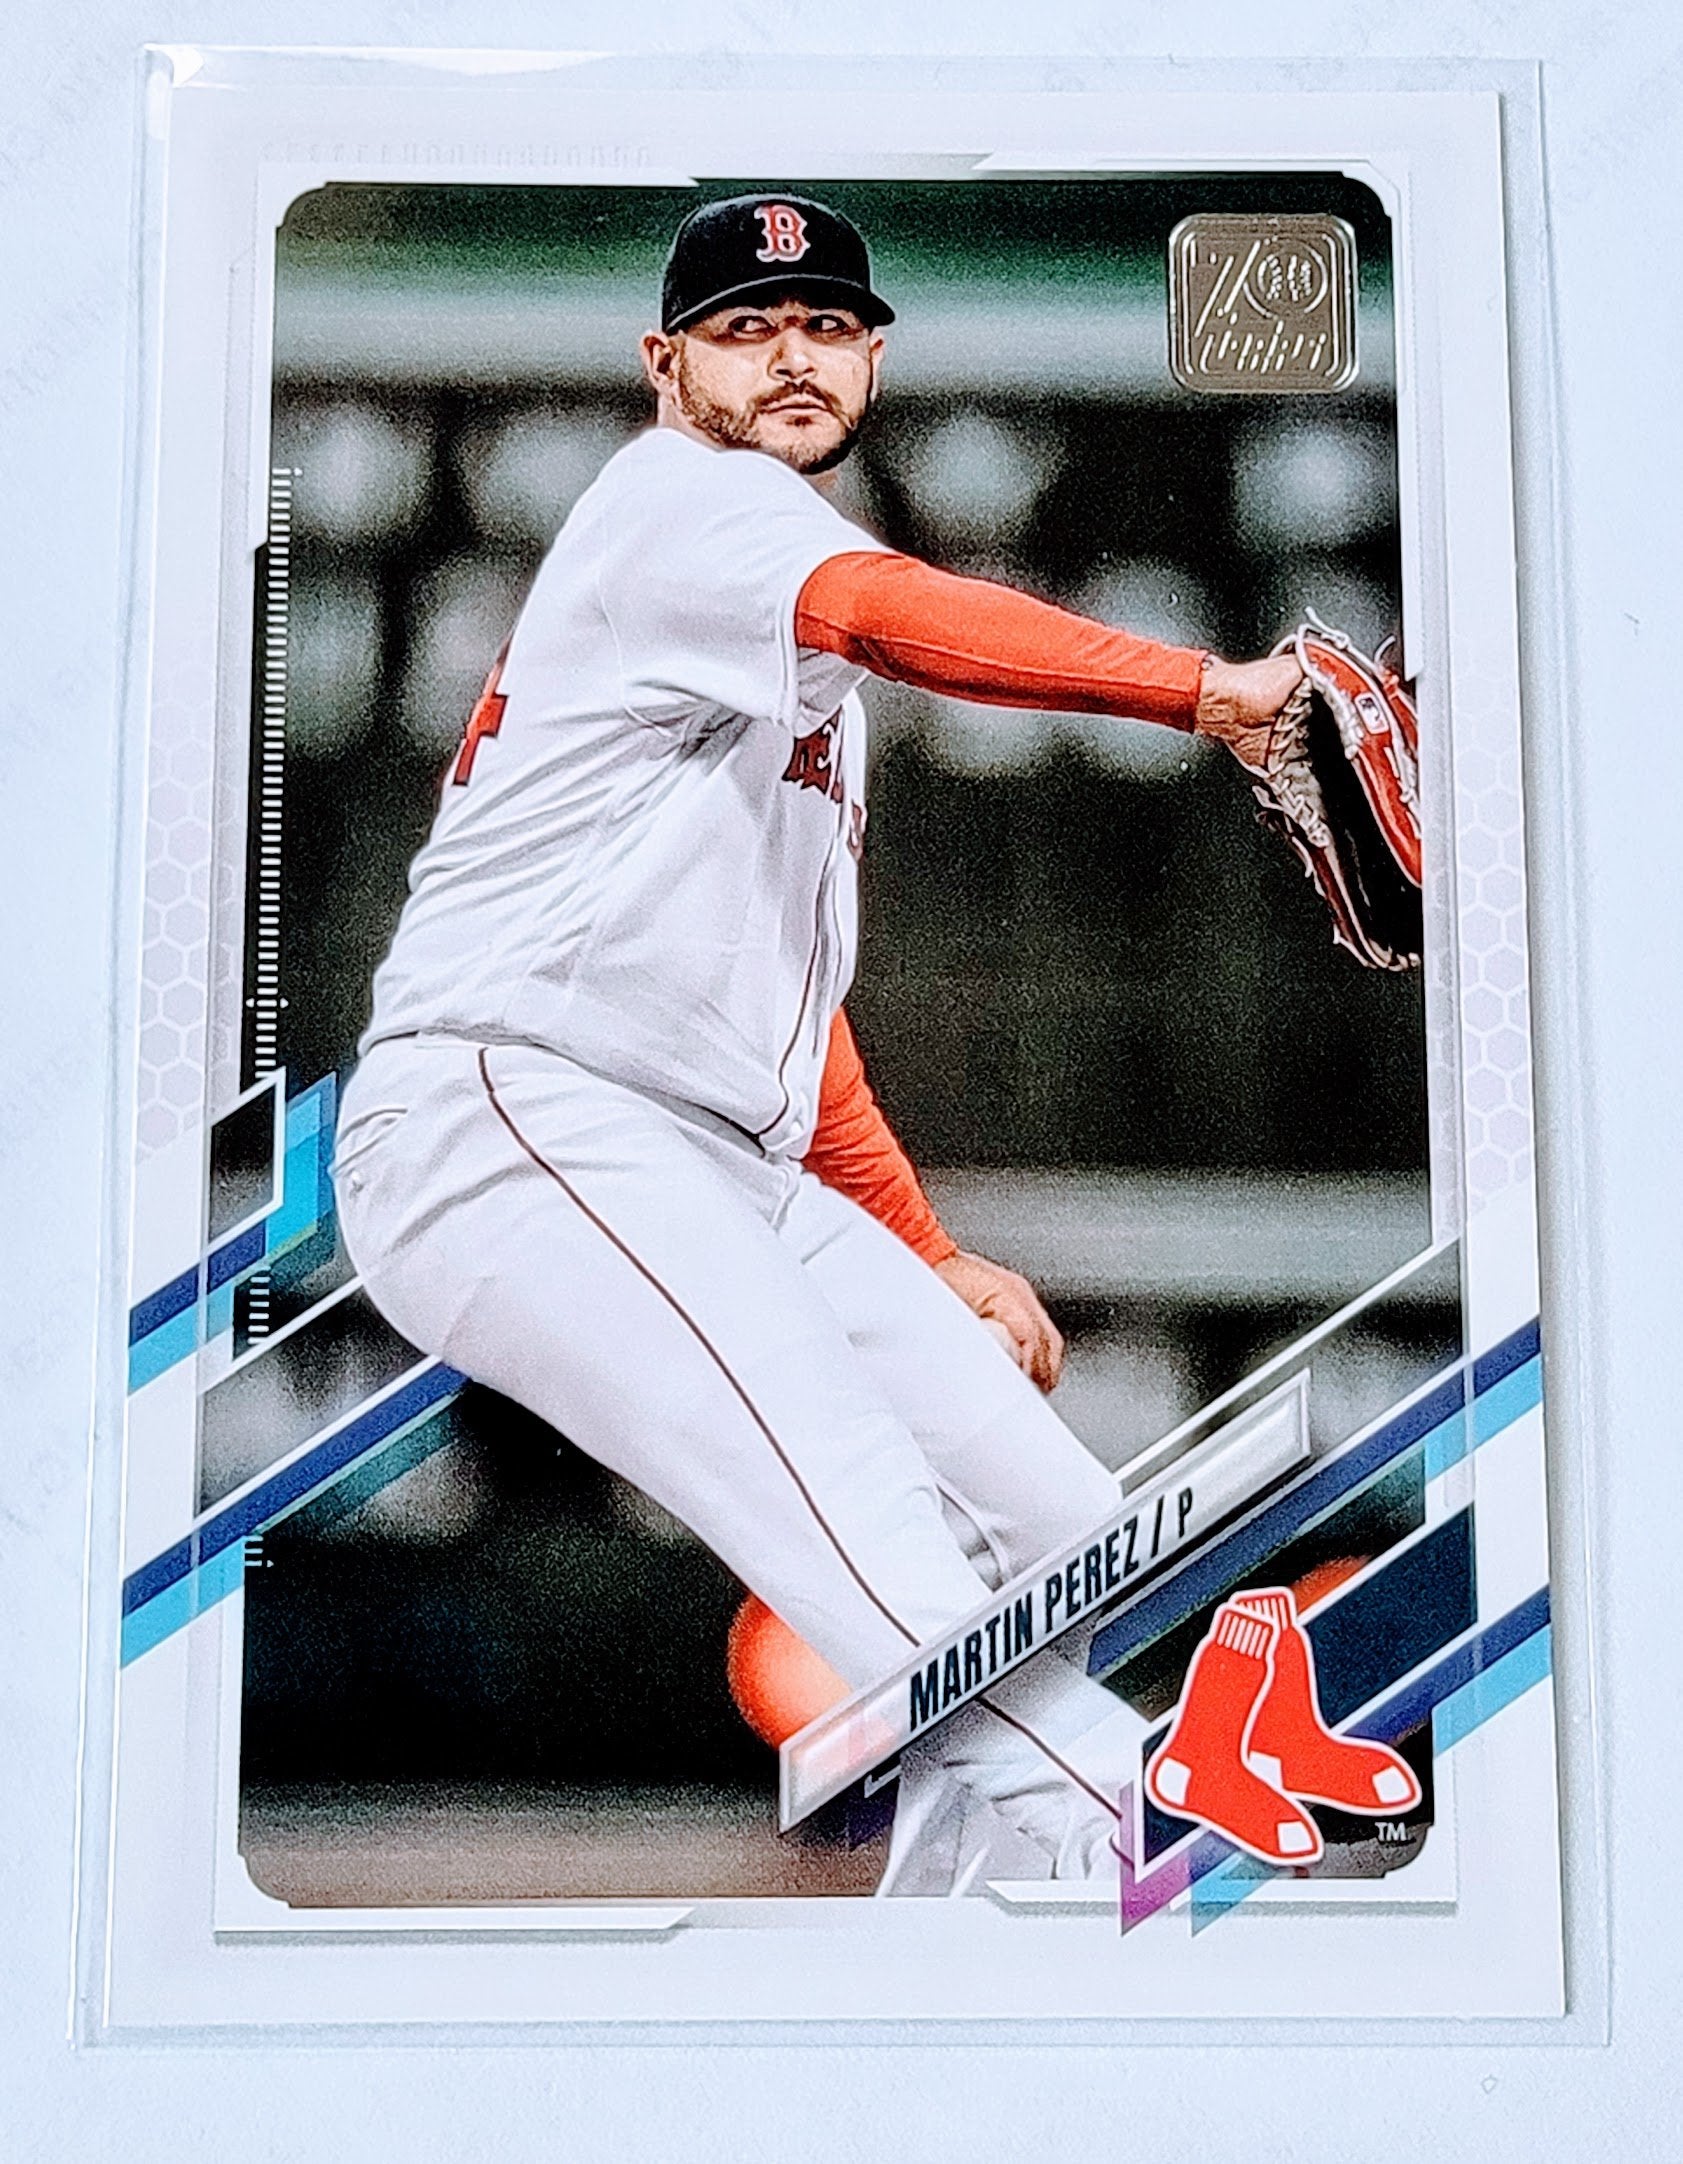 2021 Topps Update Martin Perez Baseball Trading Card SMCB1 simple Xclusive Collectibles   